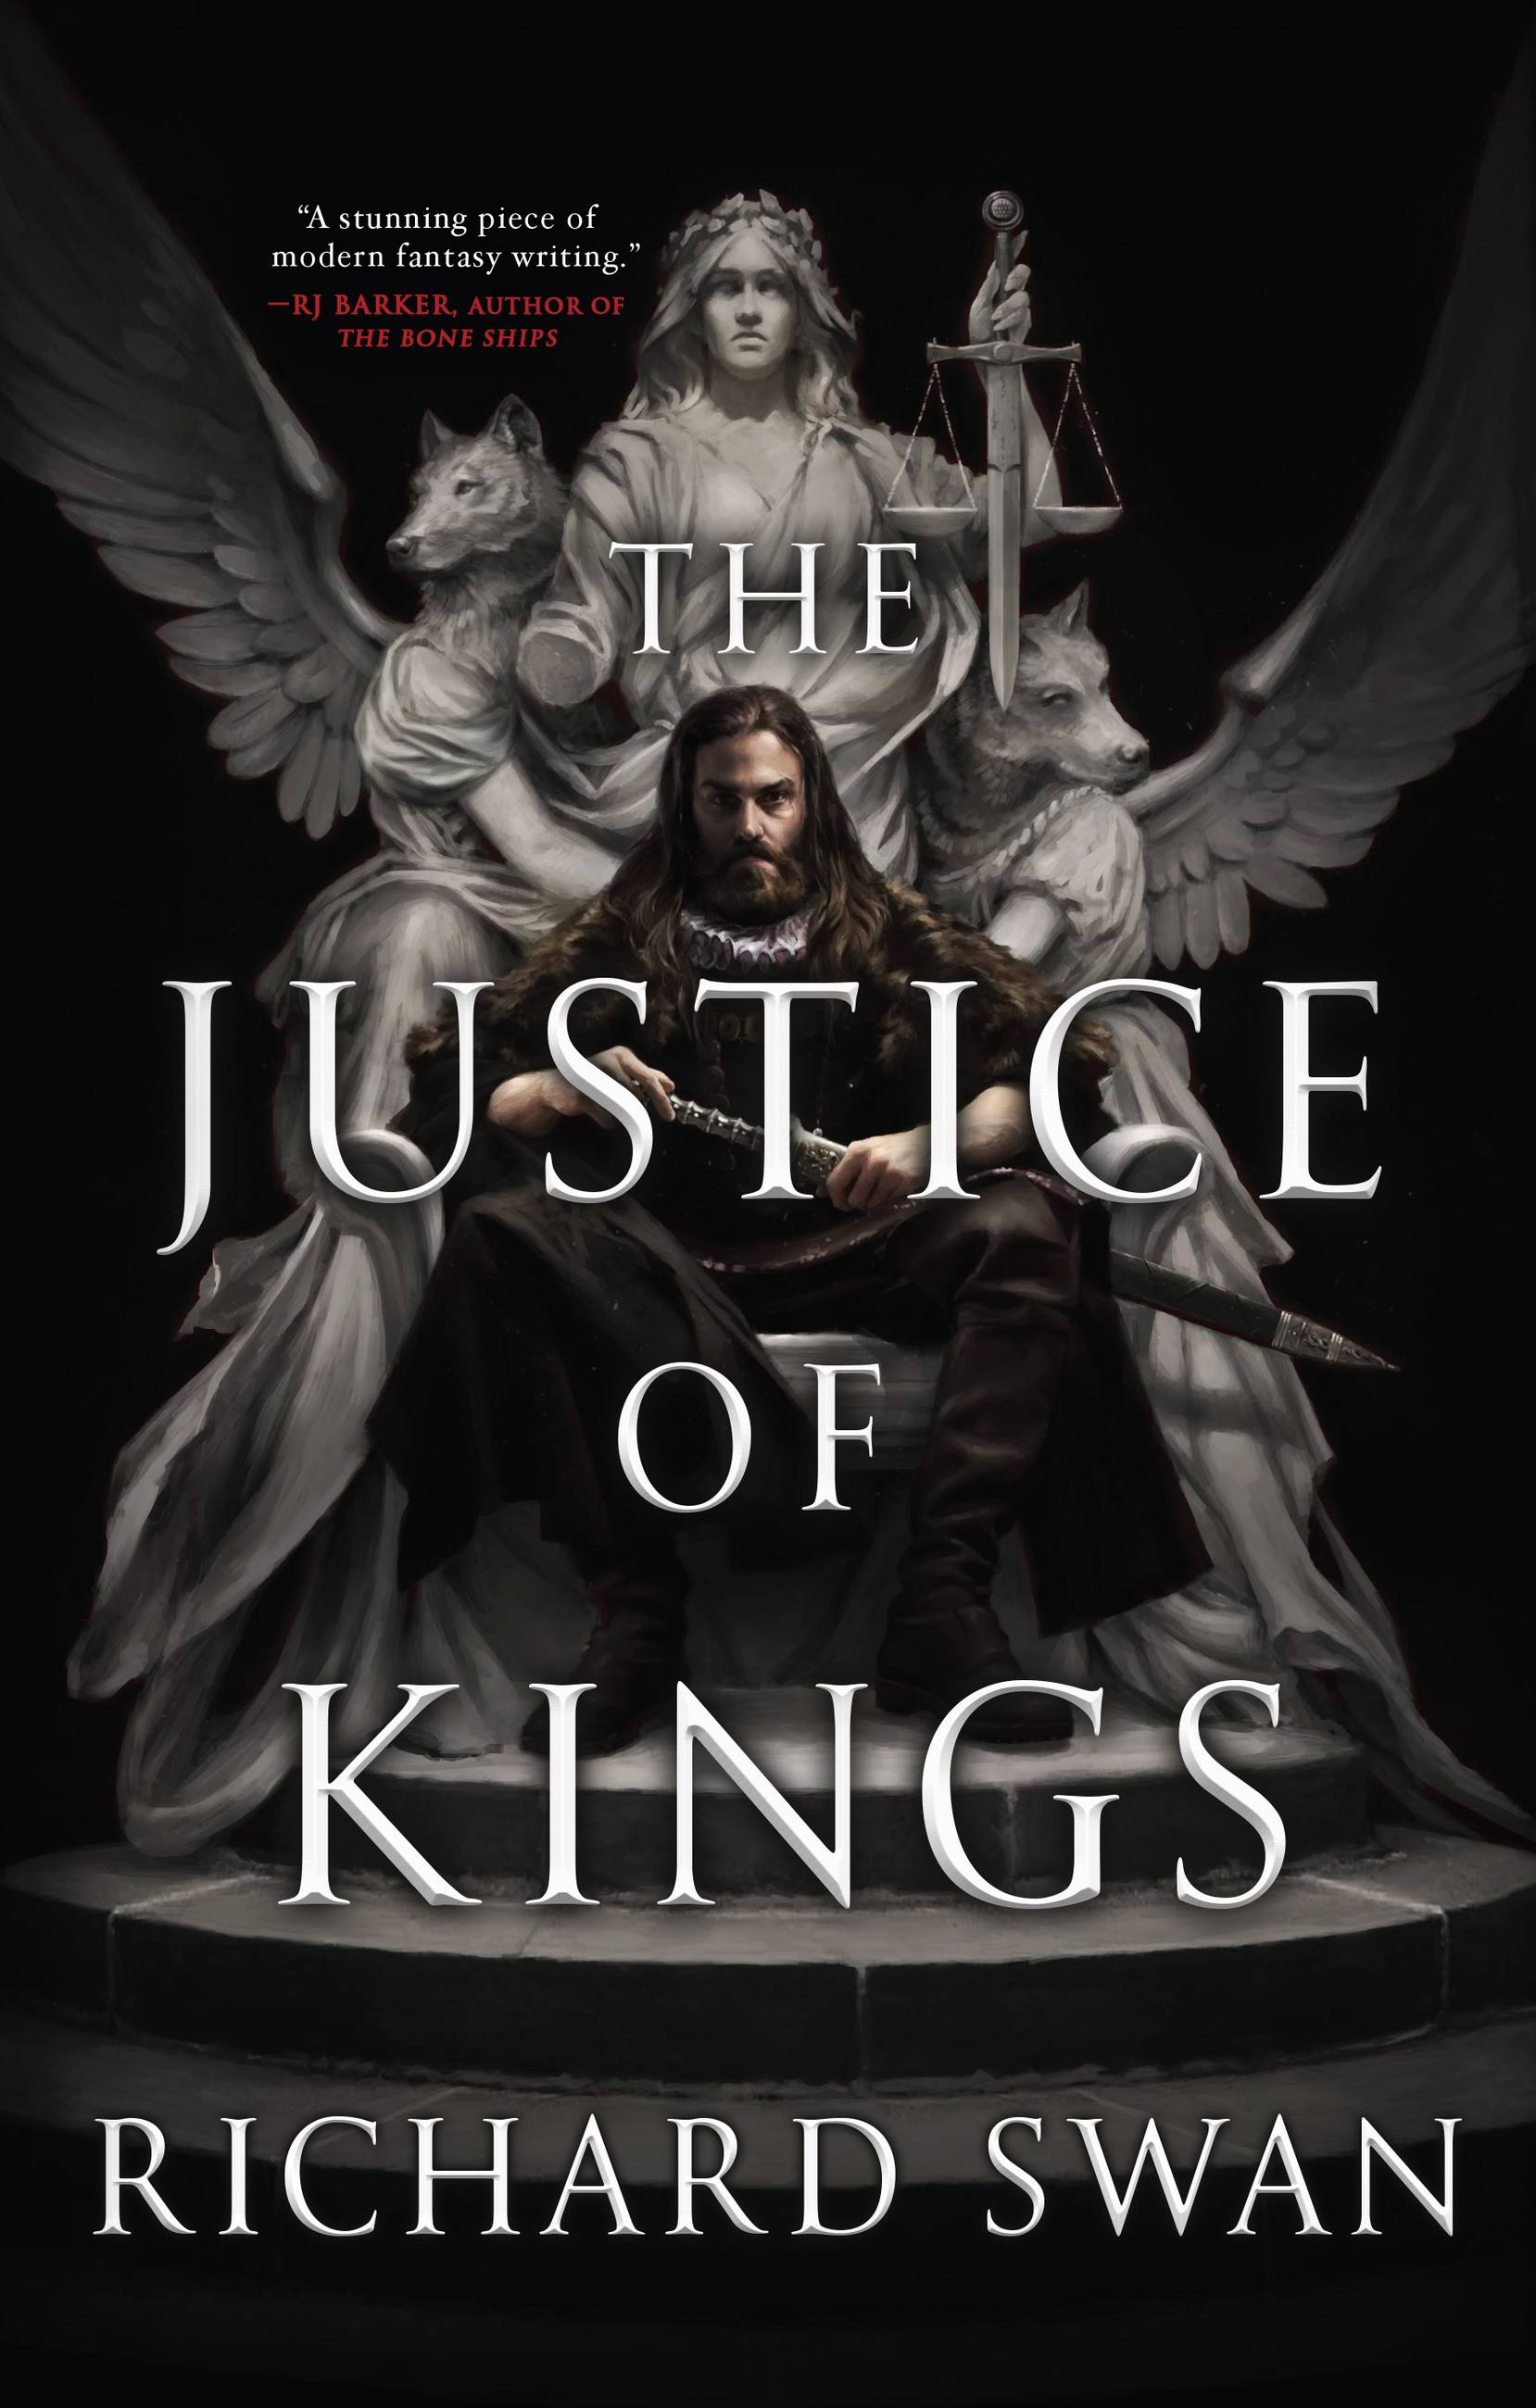 King justice. The Justice of Kings (Empire of the Wolf #1) by Richard Swan. Правосудие королей Крига.